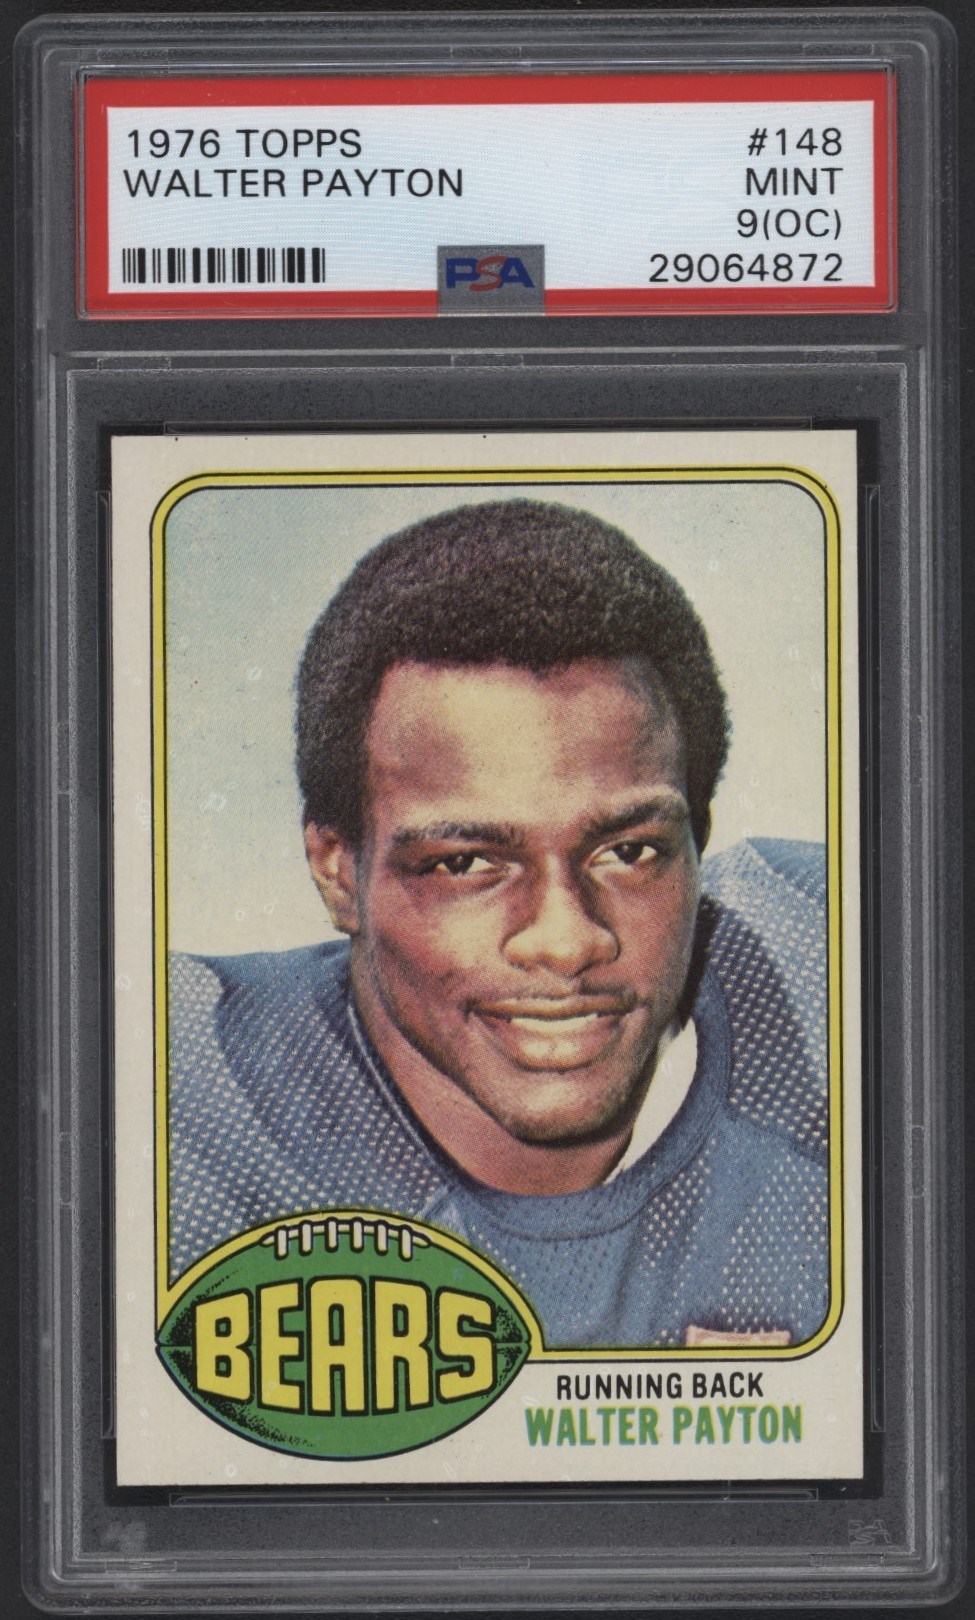 Baseball and Trading Cards - 1976 Topps Football Complete Set (528) with Walter Payton RC PSA 9 (OC)